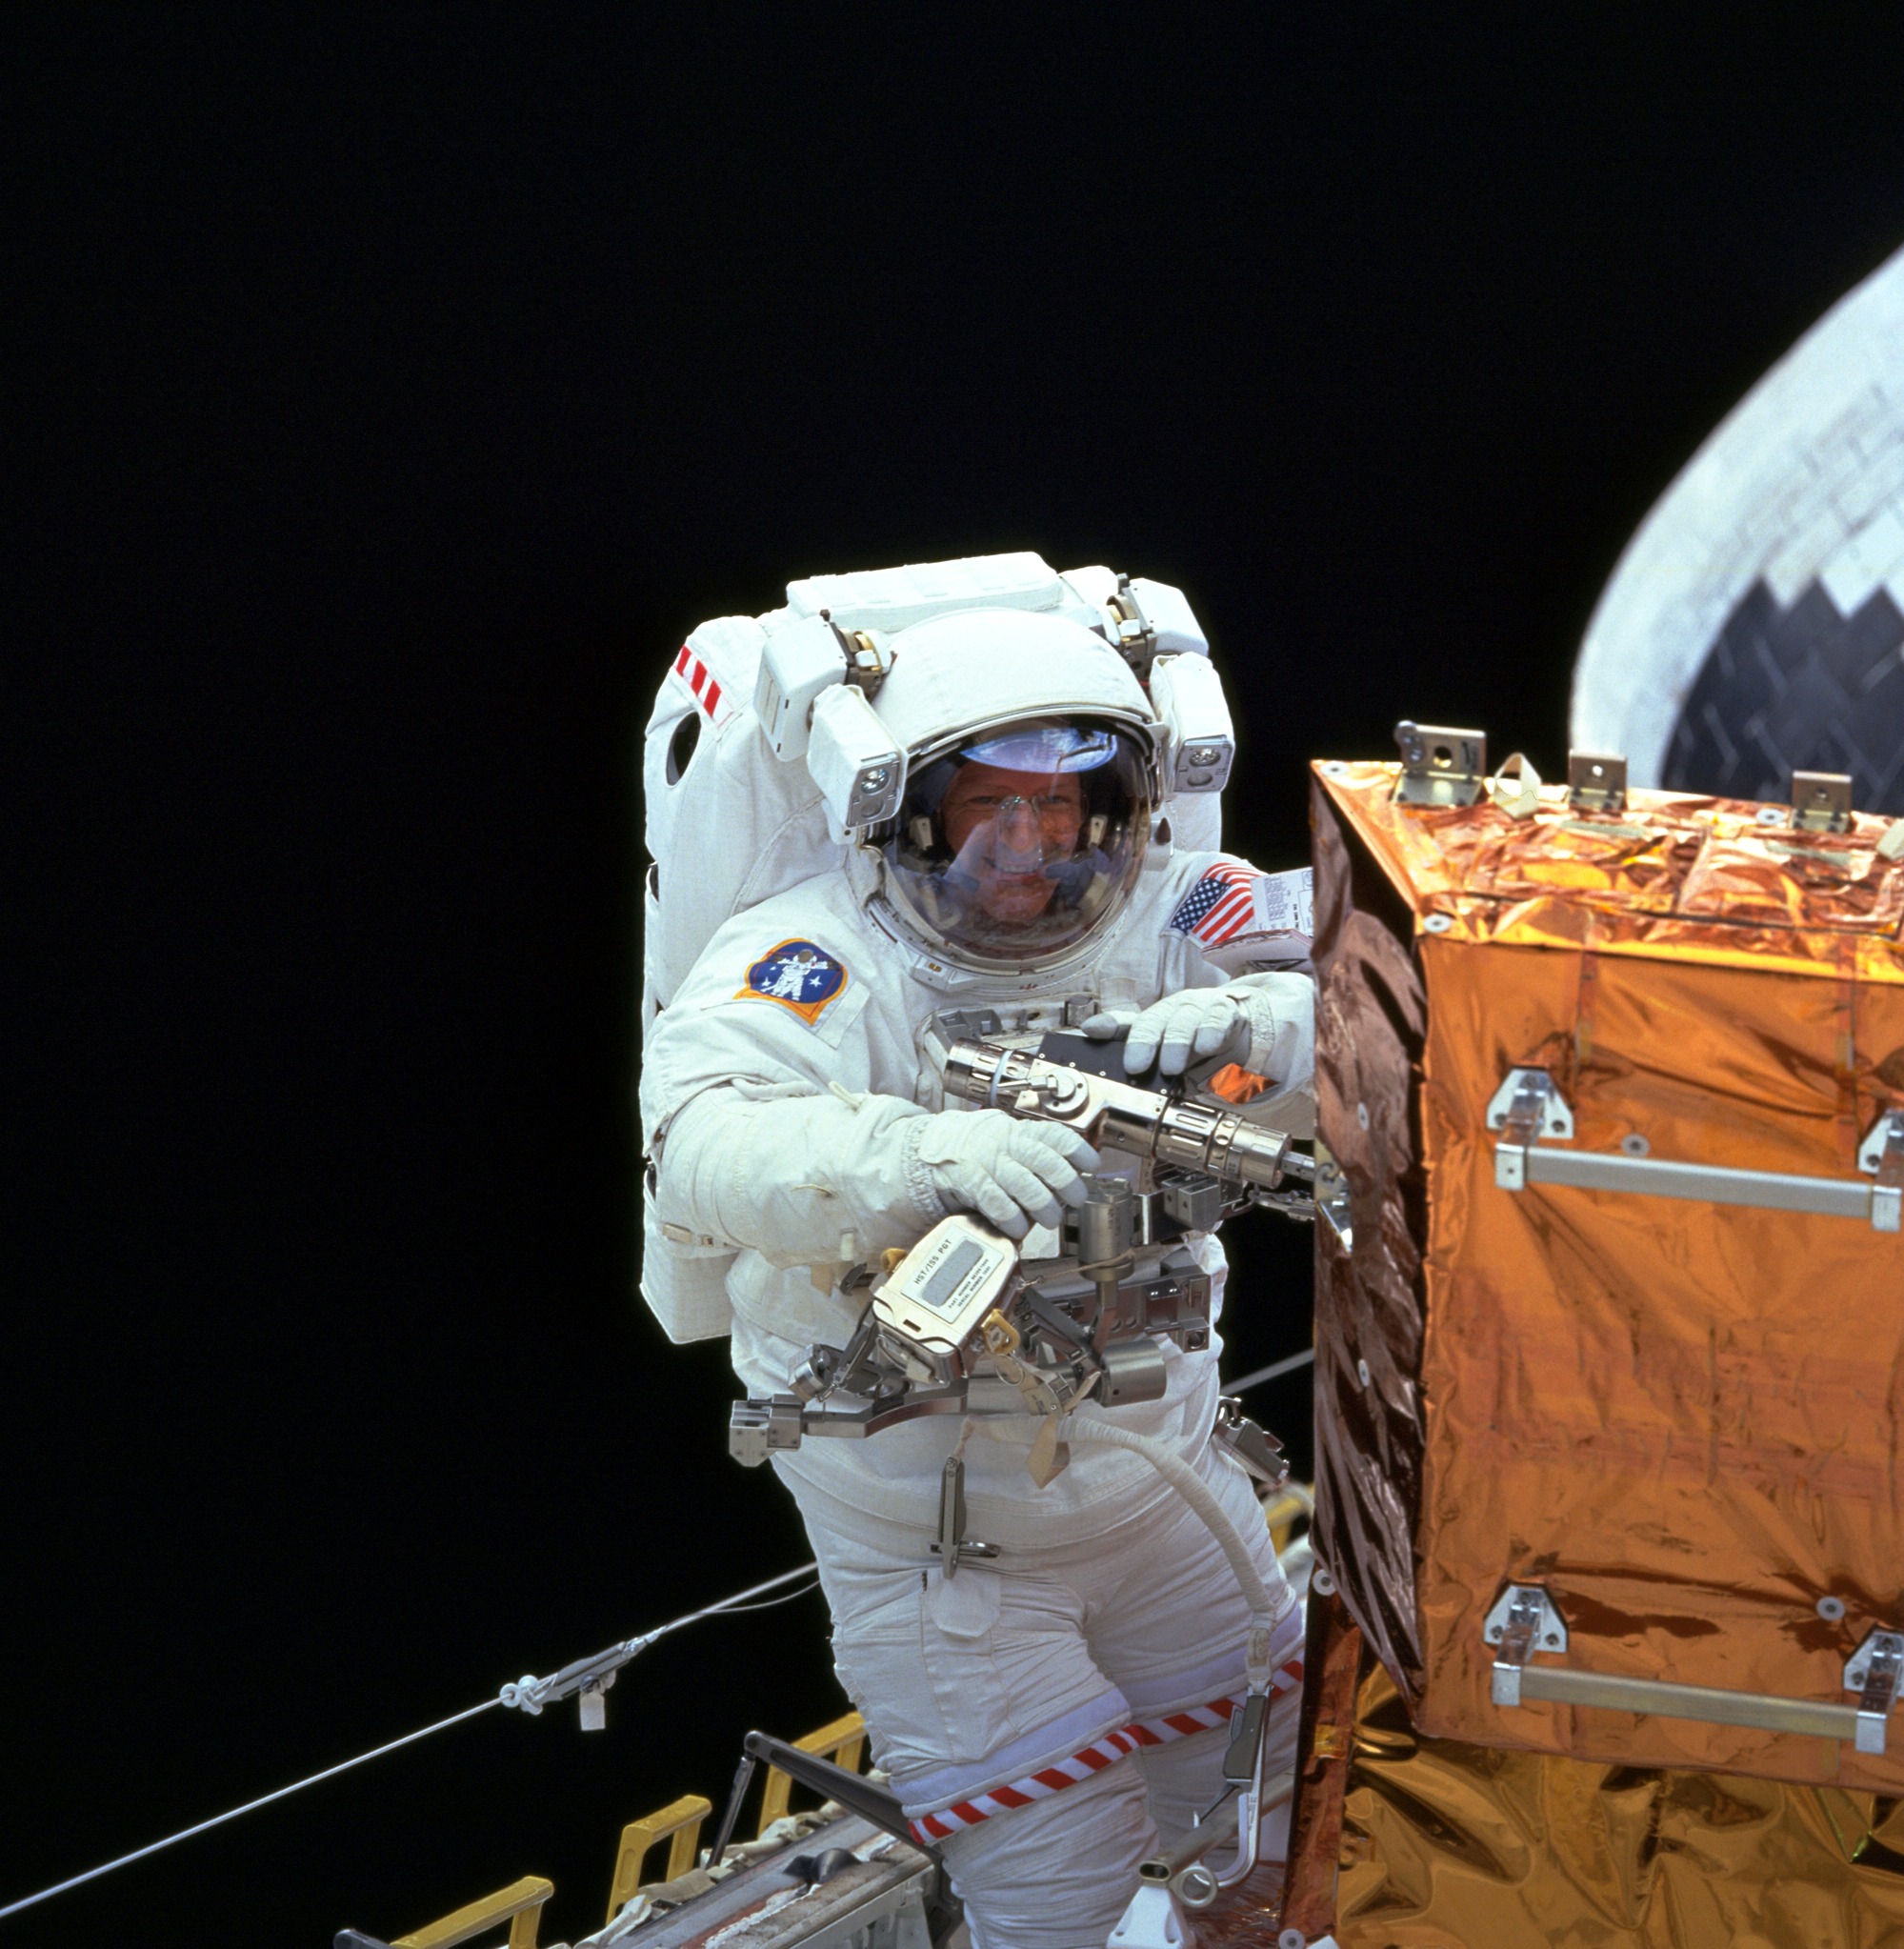 Despite being Switzerland's first spacewalker, Claude Nicollier wore a U.S. flag (as opposed to the Swiss flag) on the arm of his space suit during his EVA to service the Hubble Space Telescope (HST) in December 1999. Photo Credit: NASA